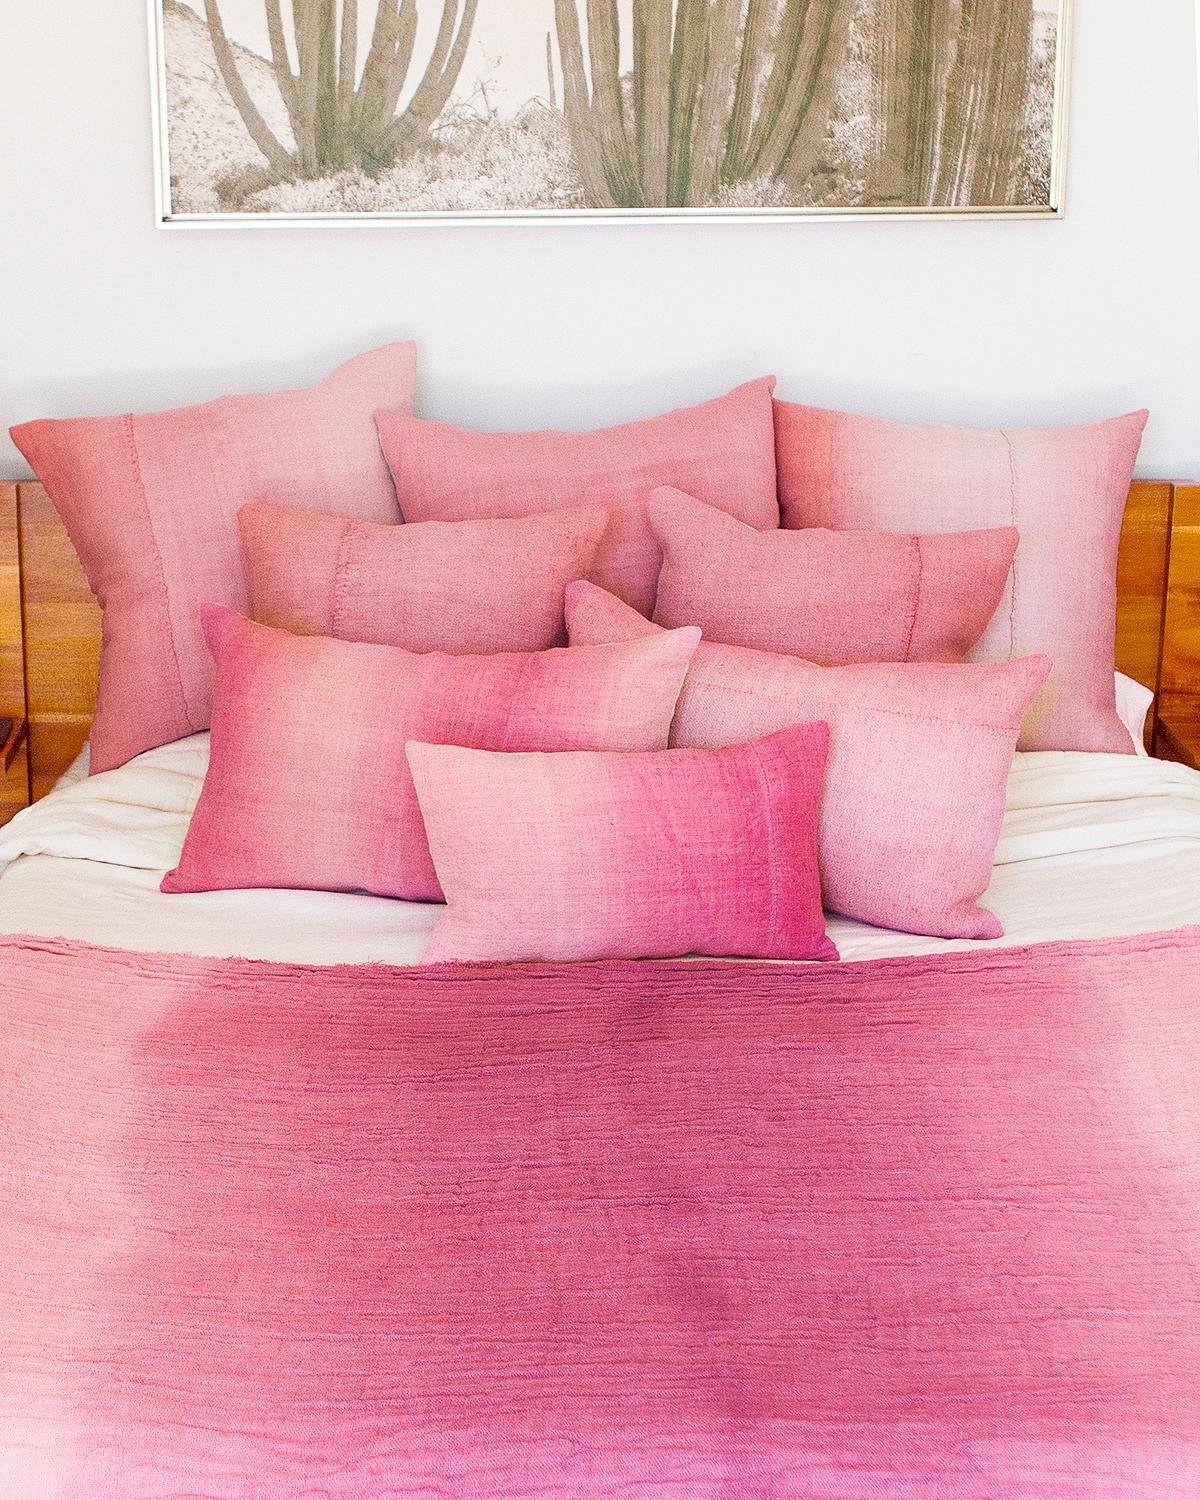 Organic Modern Espanyolet Pink Ombre Hand-Painted Vintage Linen Pillow 24